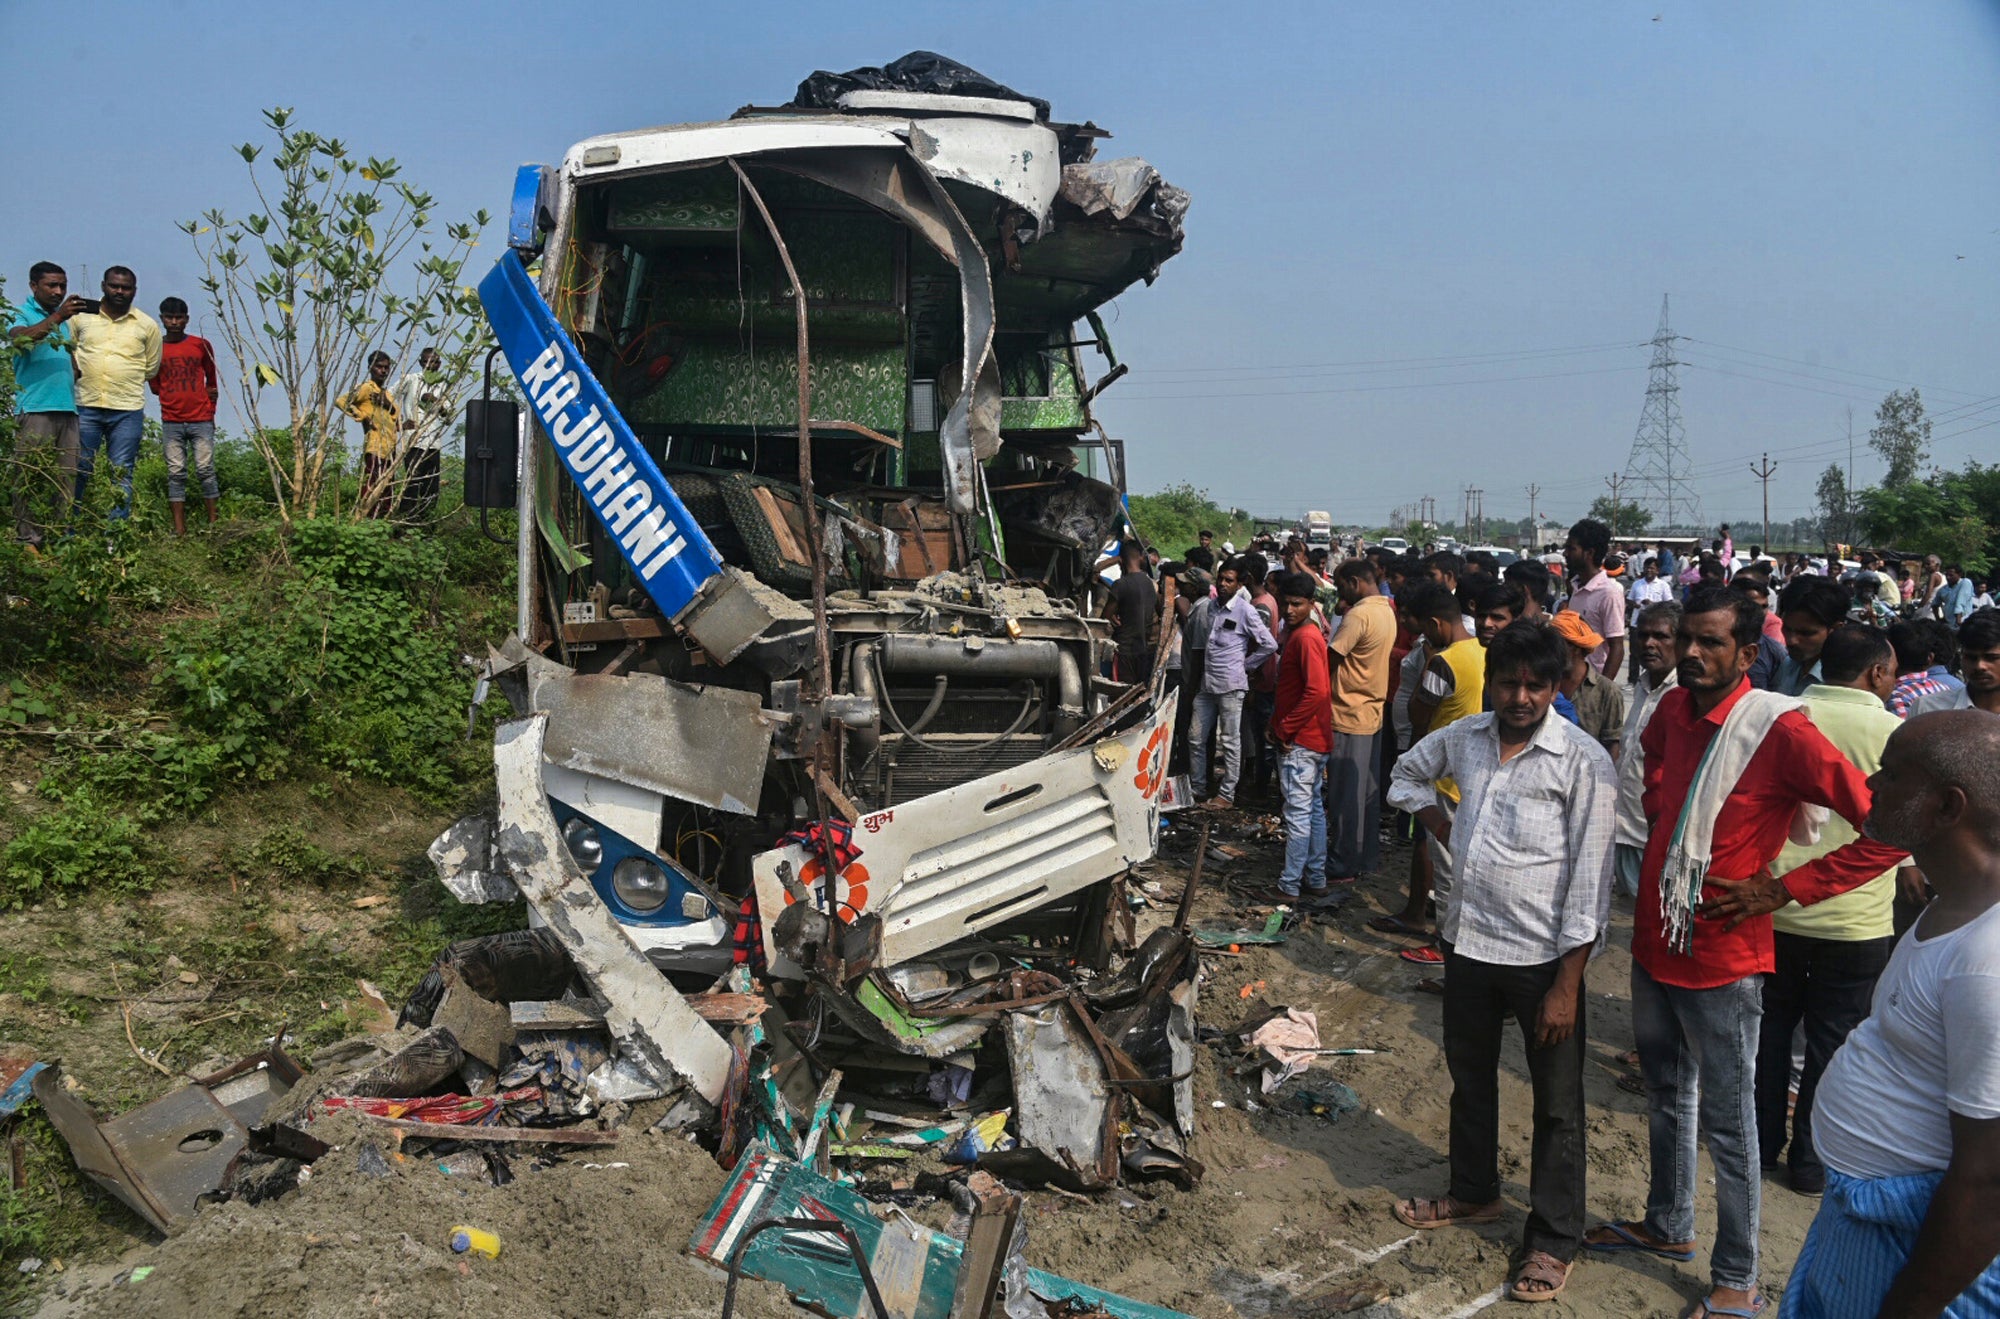 People stand near the wreckage of a bus that collided with a truck in Barabanki district in Uttar Pradesh state, India